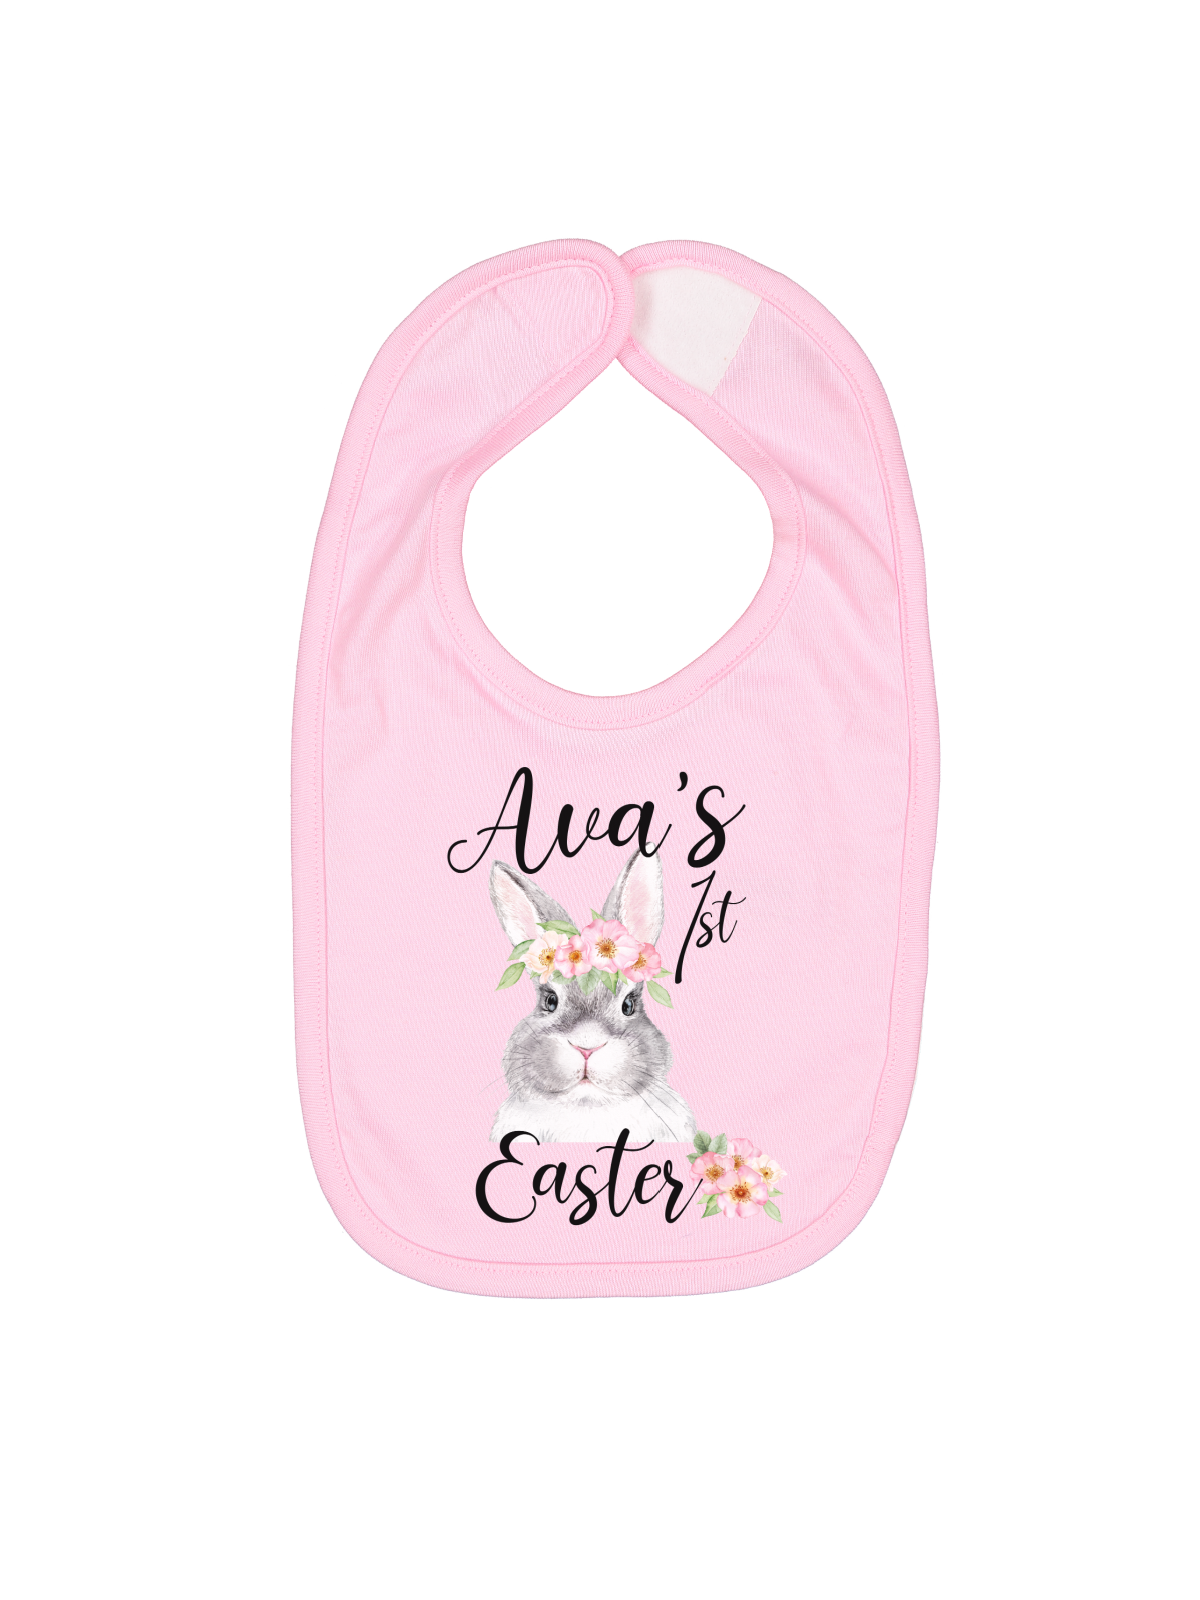 Baby Girl's First Easter Bib in Pink